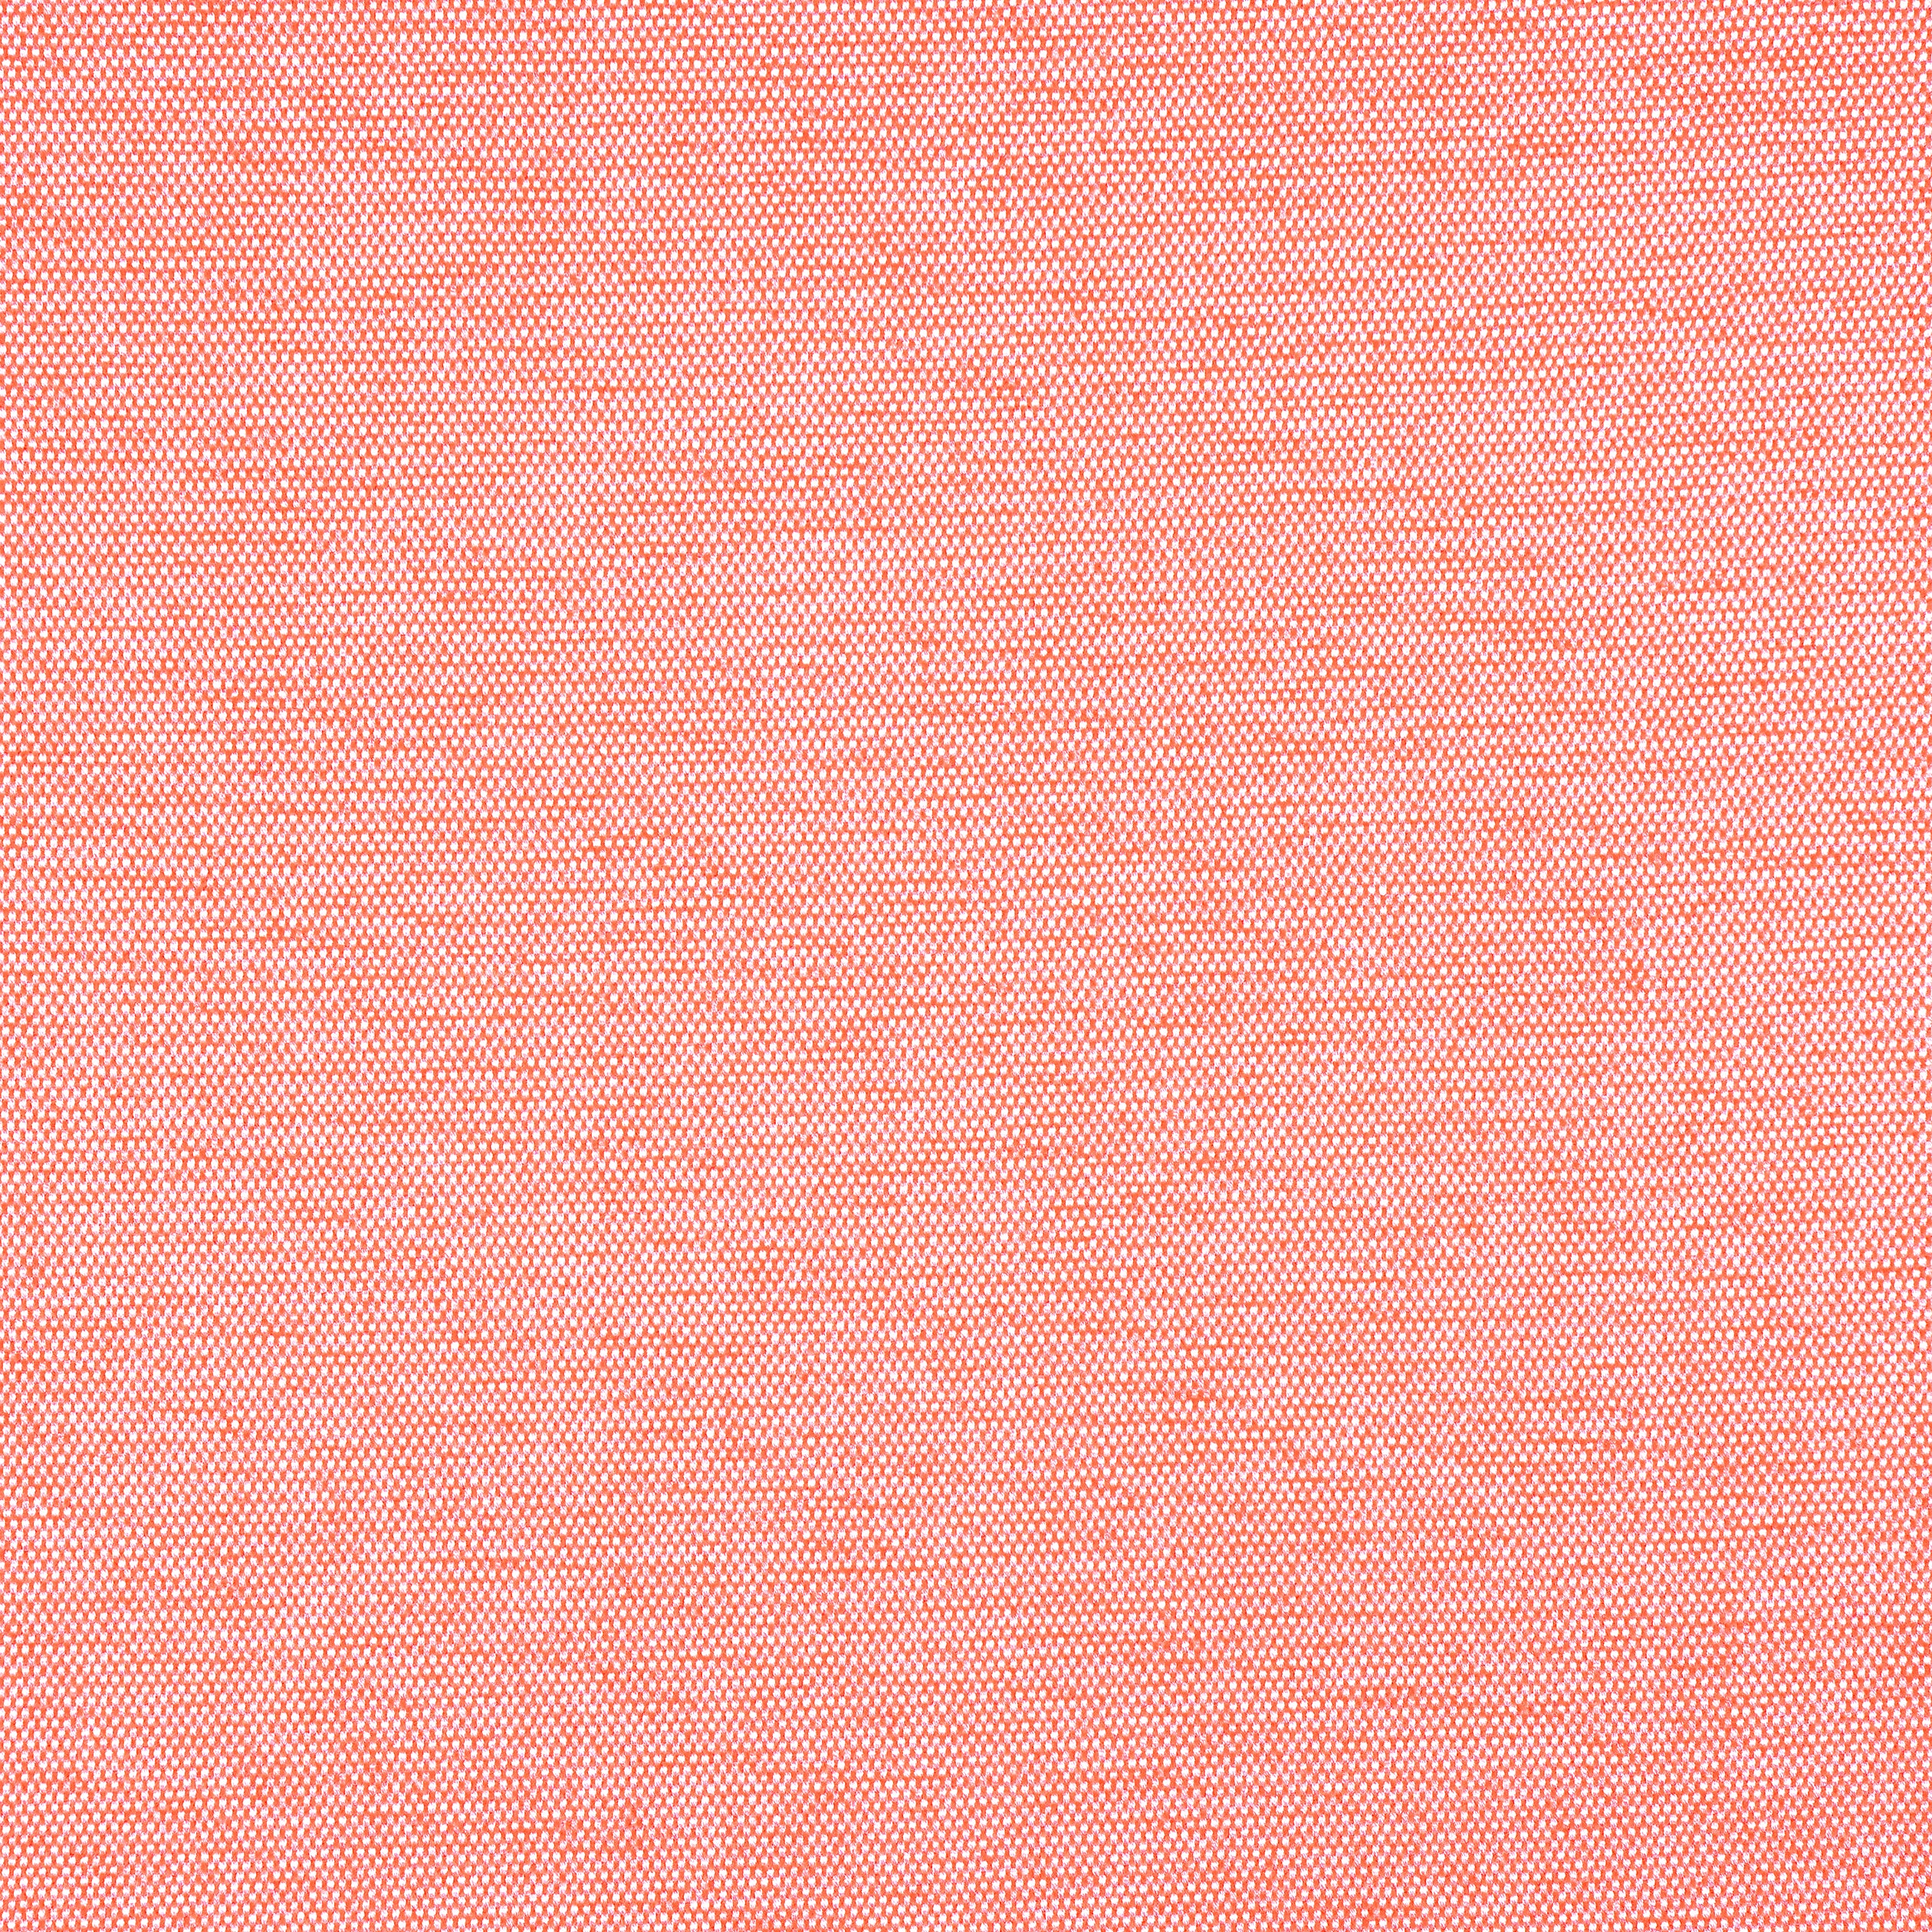 Clara fabric in coral color - pattern number W8595 - by Thibaut in the Villa Textures collection